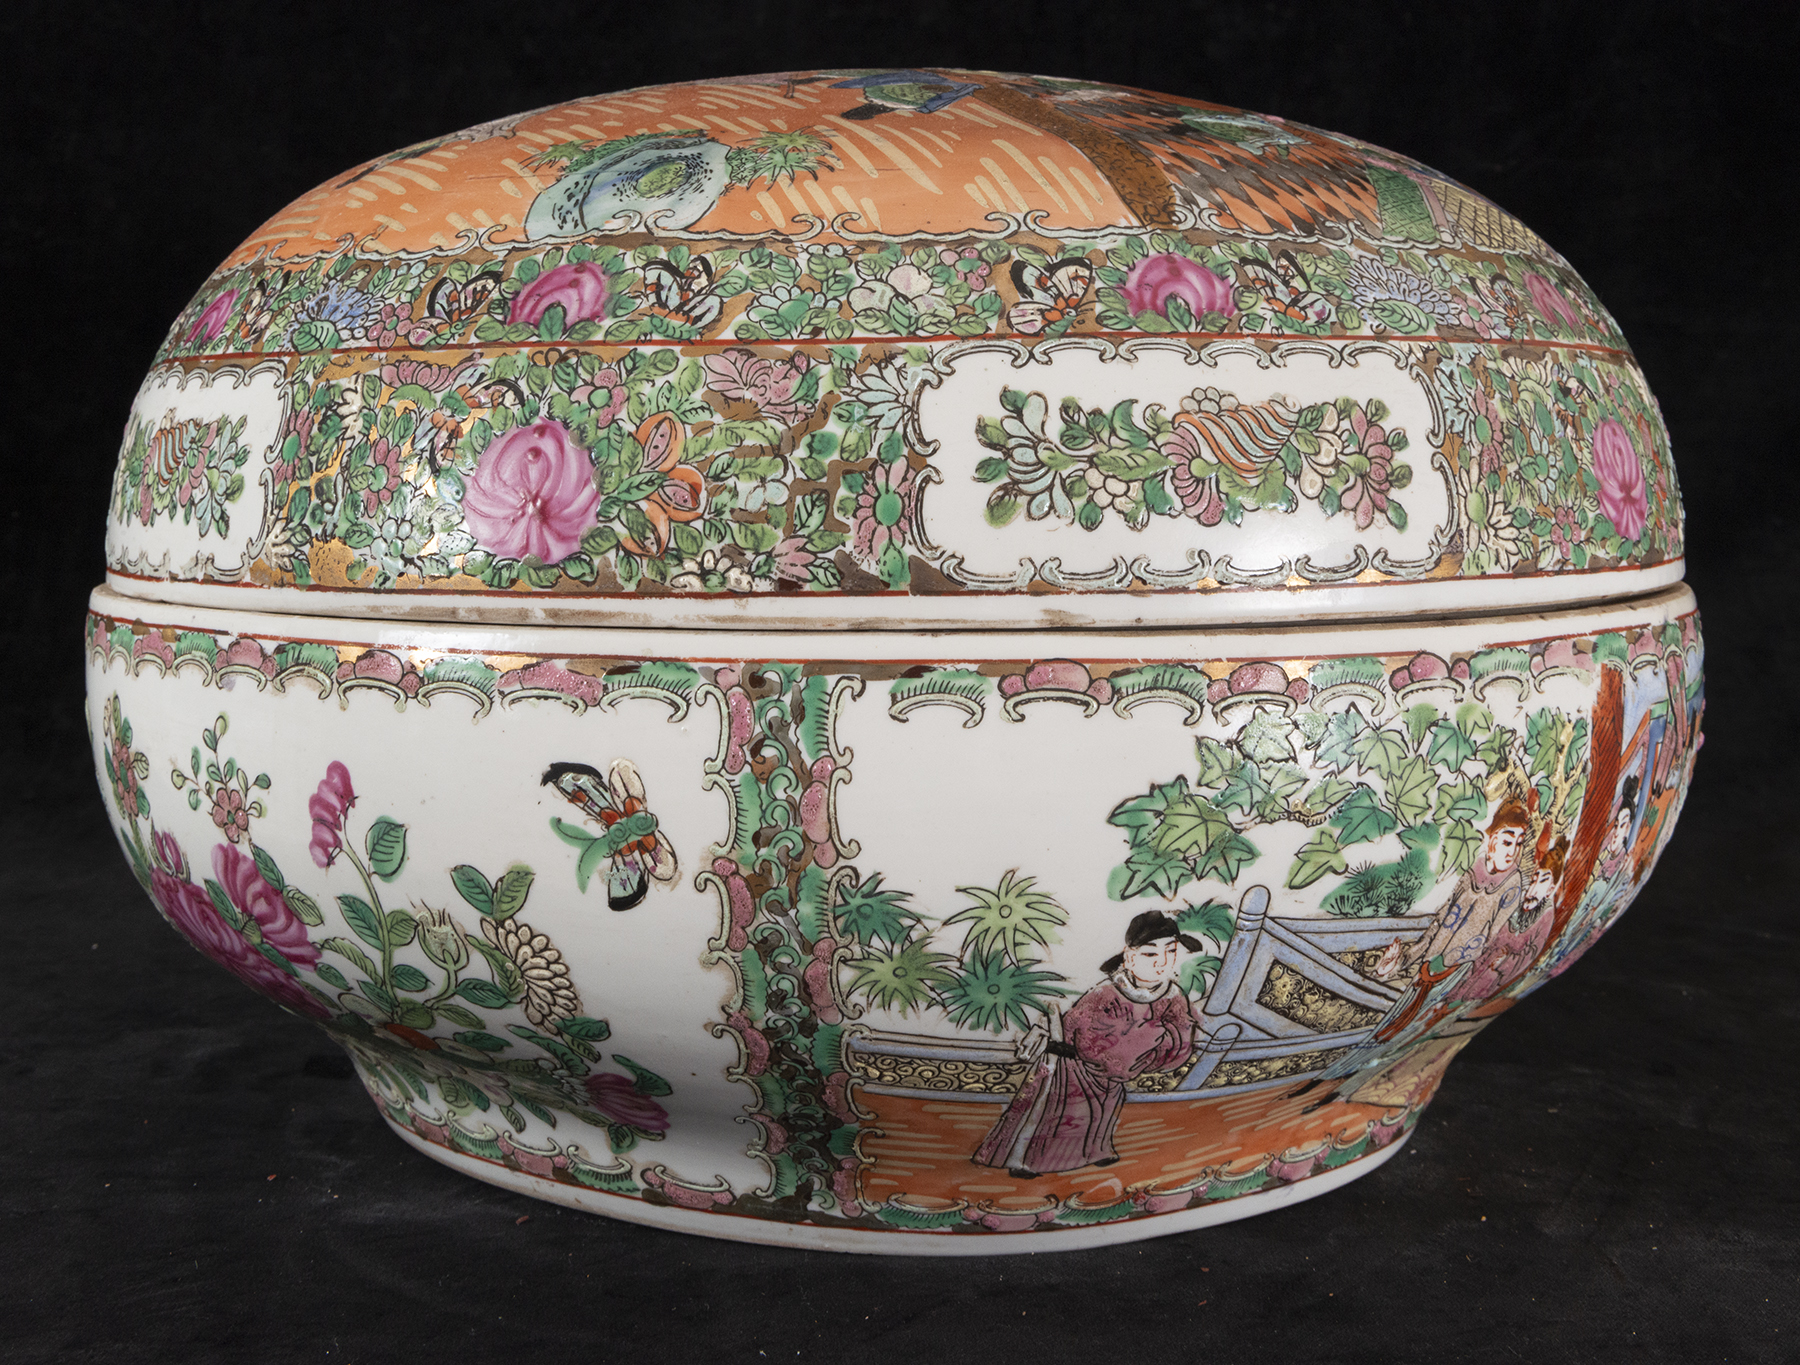 Large Canton Chinese porcelain box in "famille rose" enamel, late 19th century - Image 3 of 5